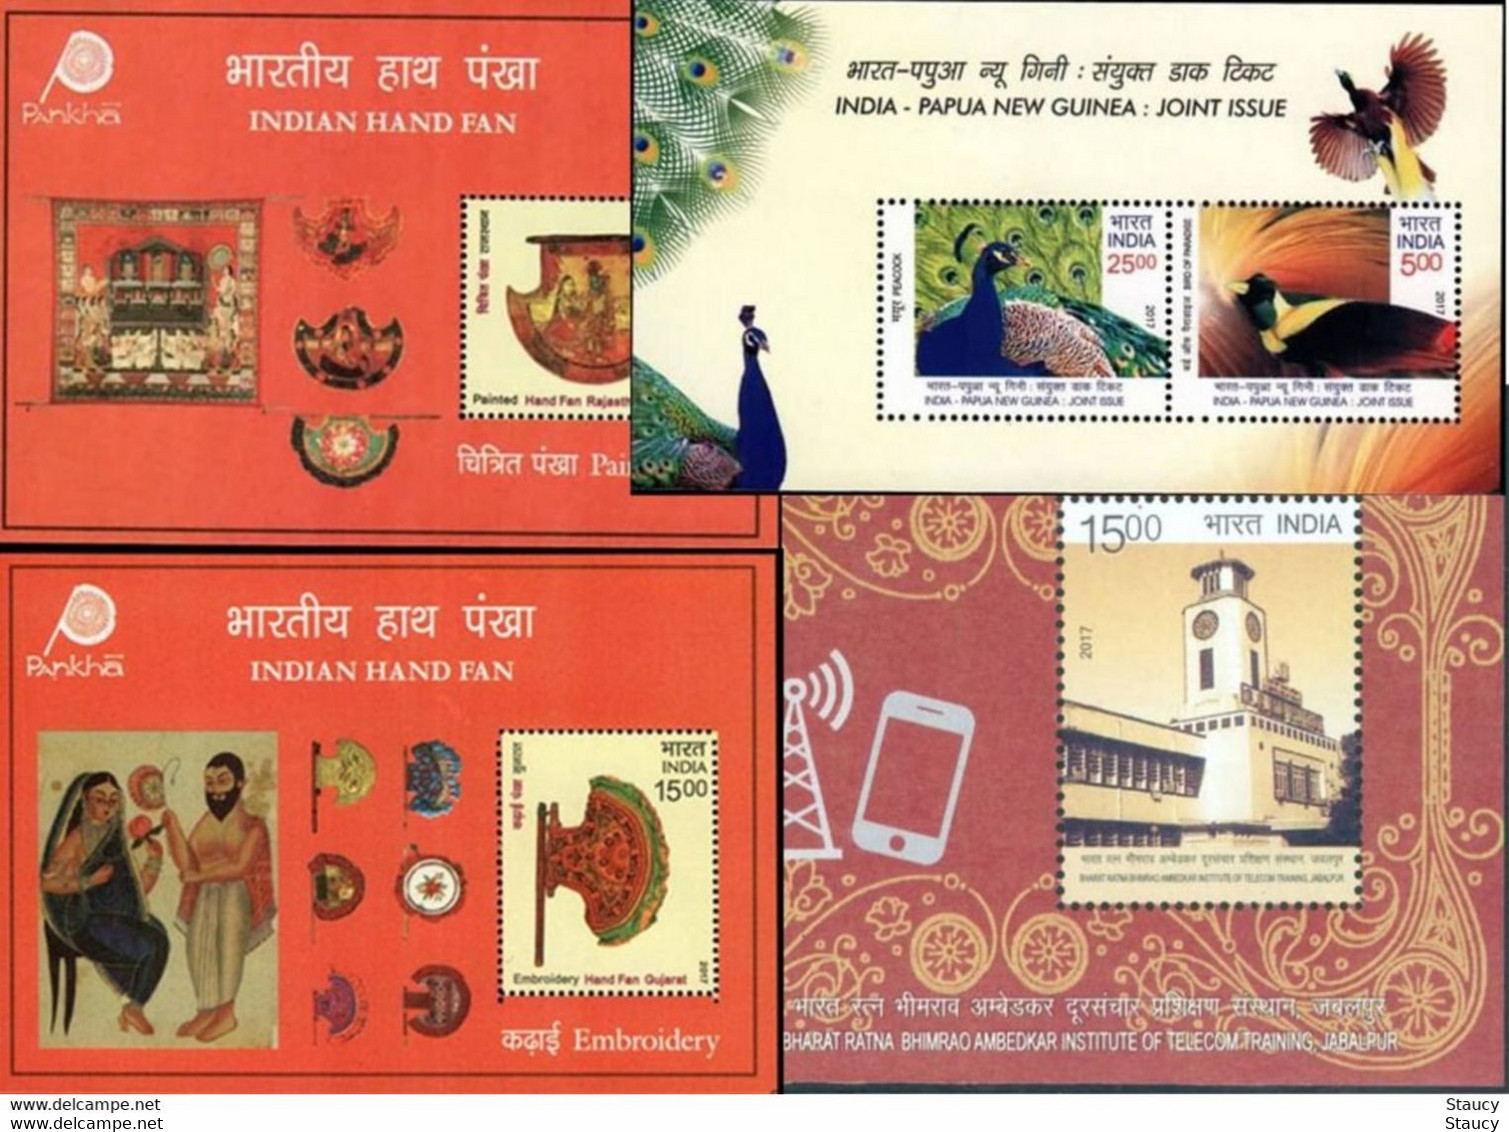 India 2017 Complete/ Full Set Of 29 Different Mini/ Miniature Sheets Year Pack MS MNH As Per Scan - Peacocks